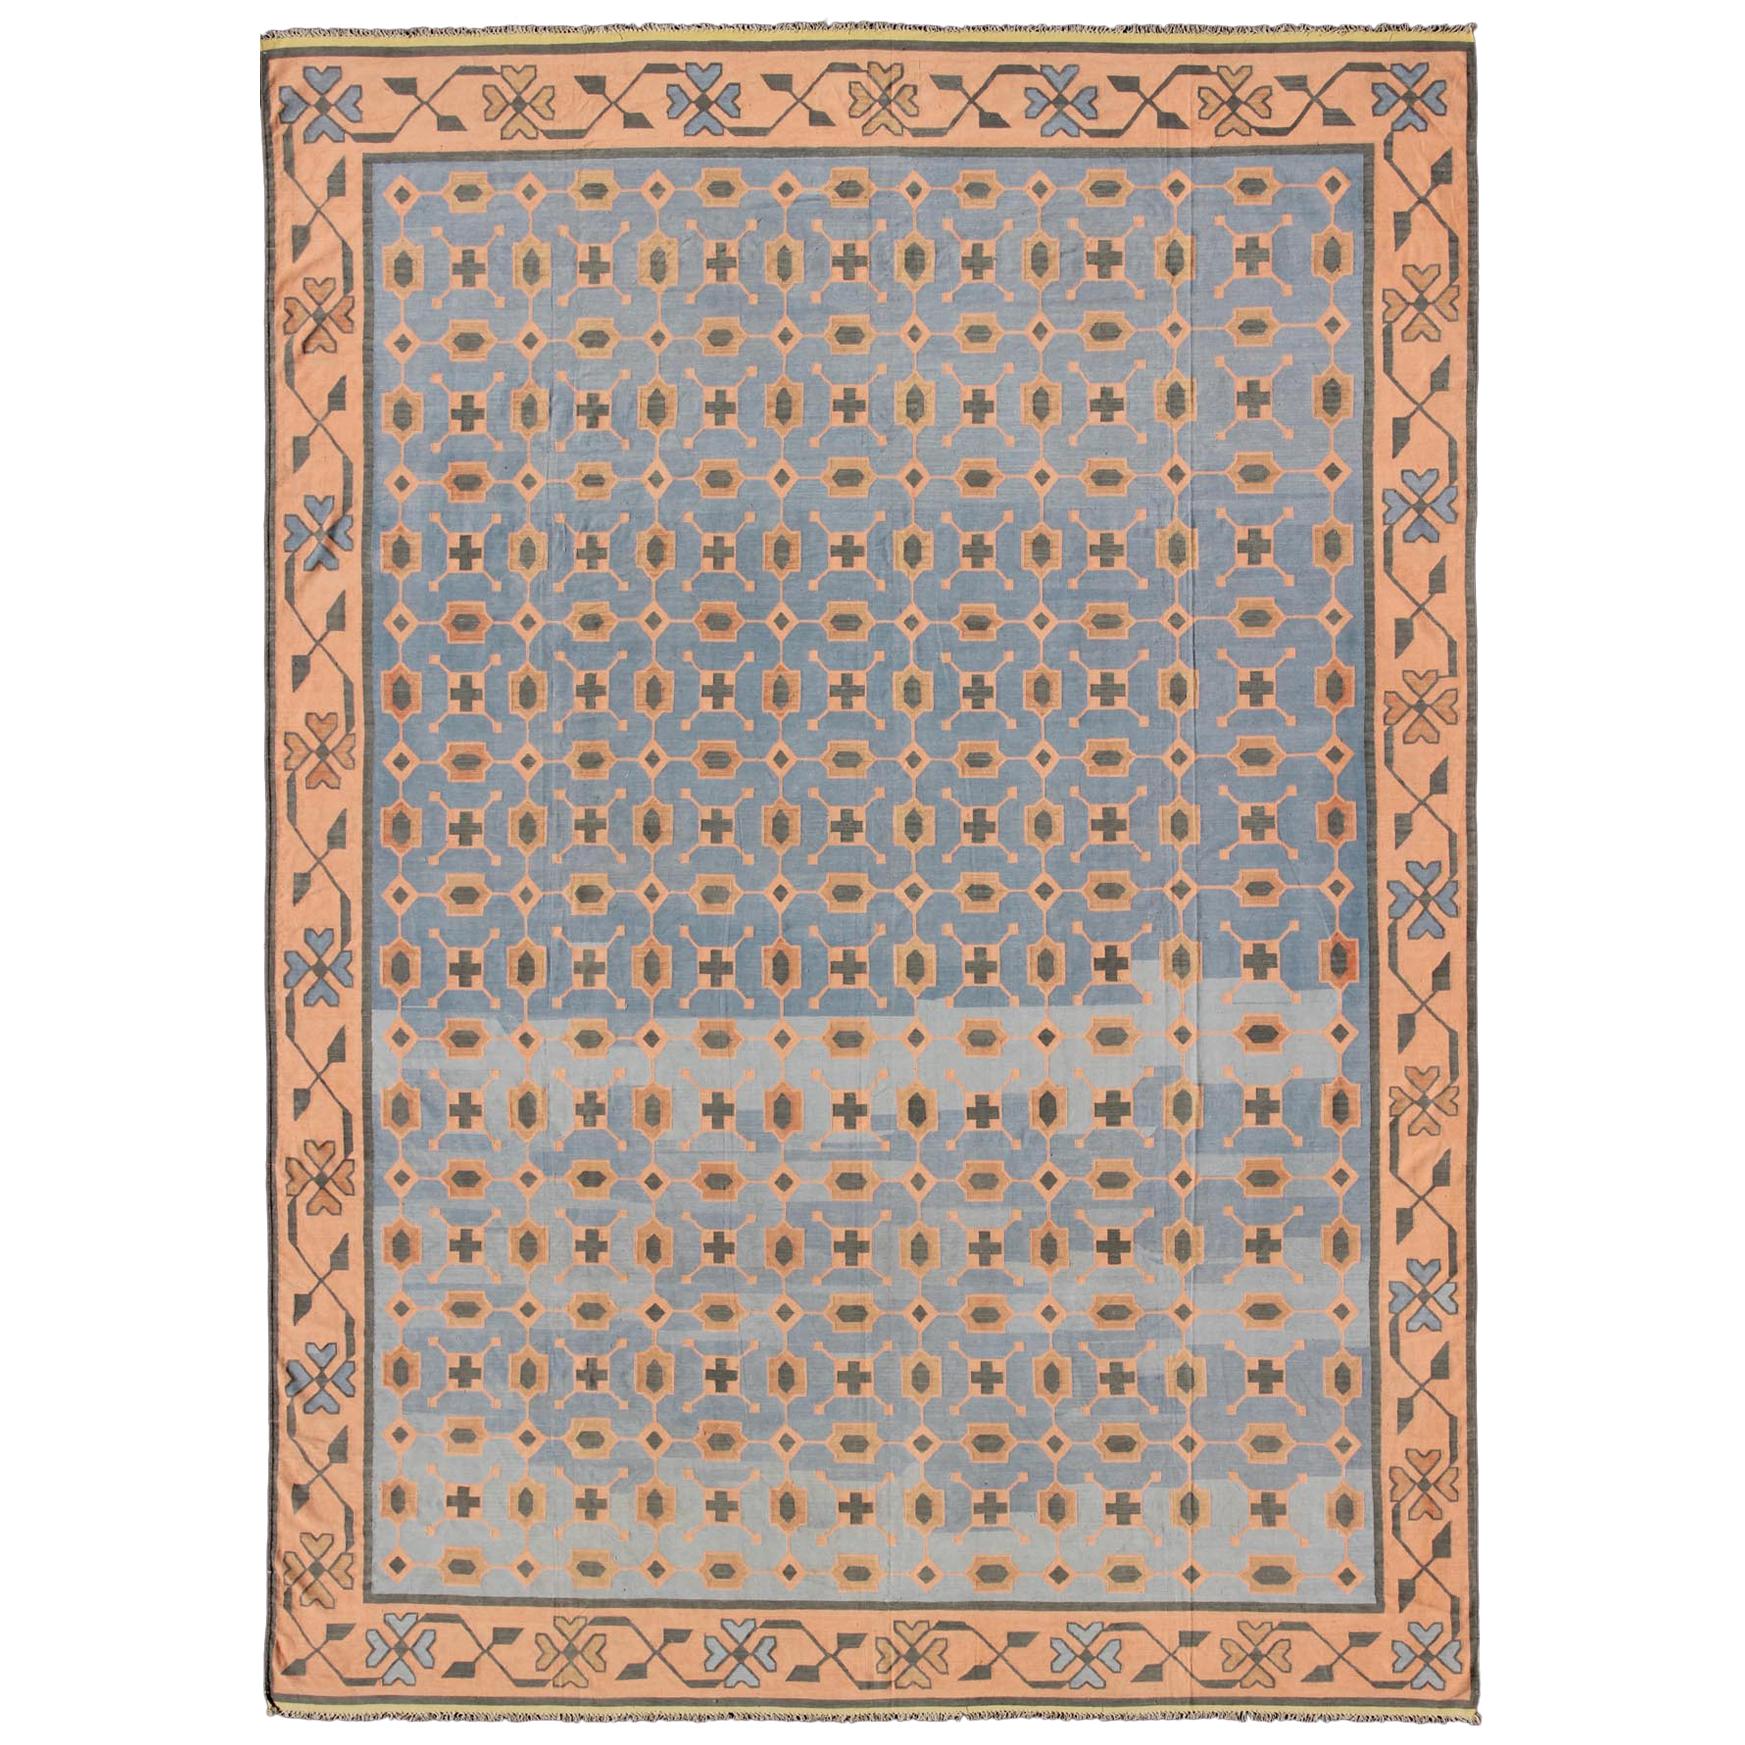 Multicolored Vintage Indian Cotton Dhurrie Rug with All-Over Geometric Design For Sale